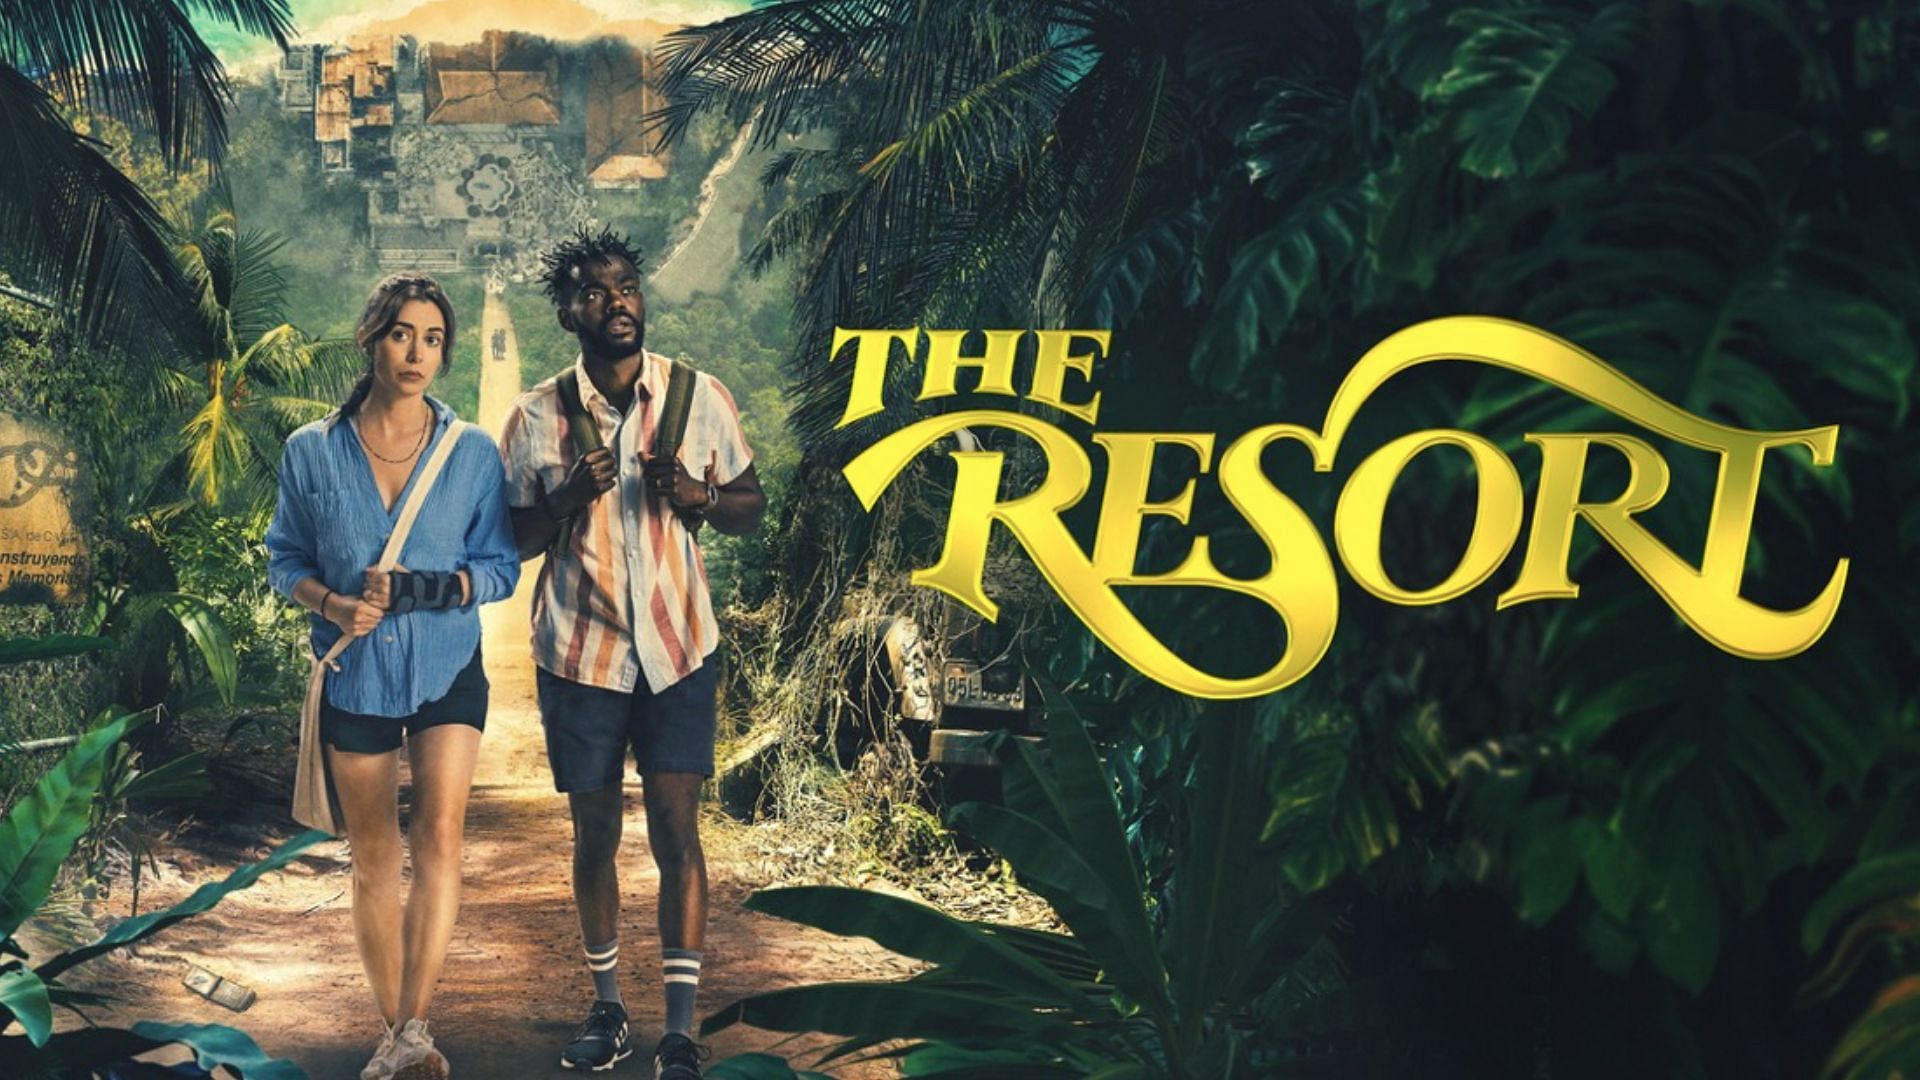 The Resort on Peacock (Image via Rotten Tomatoes)